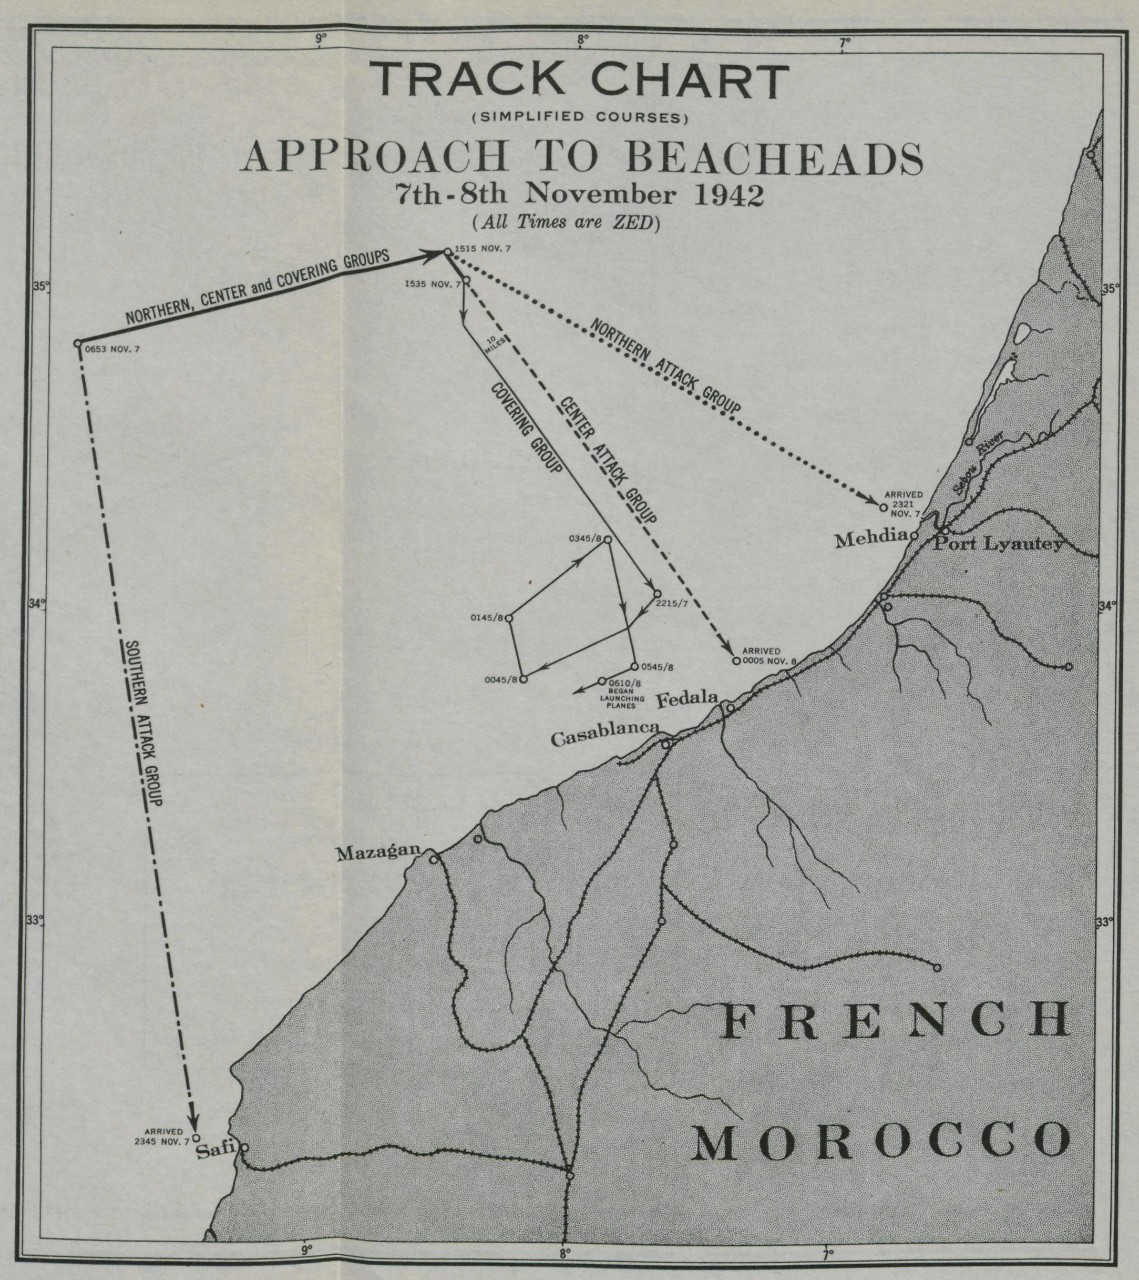 Track Chart Approach to Beacheads